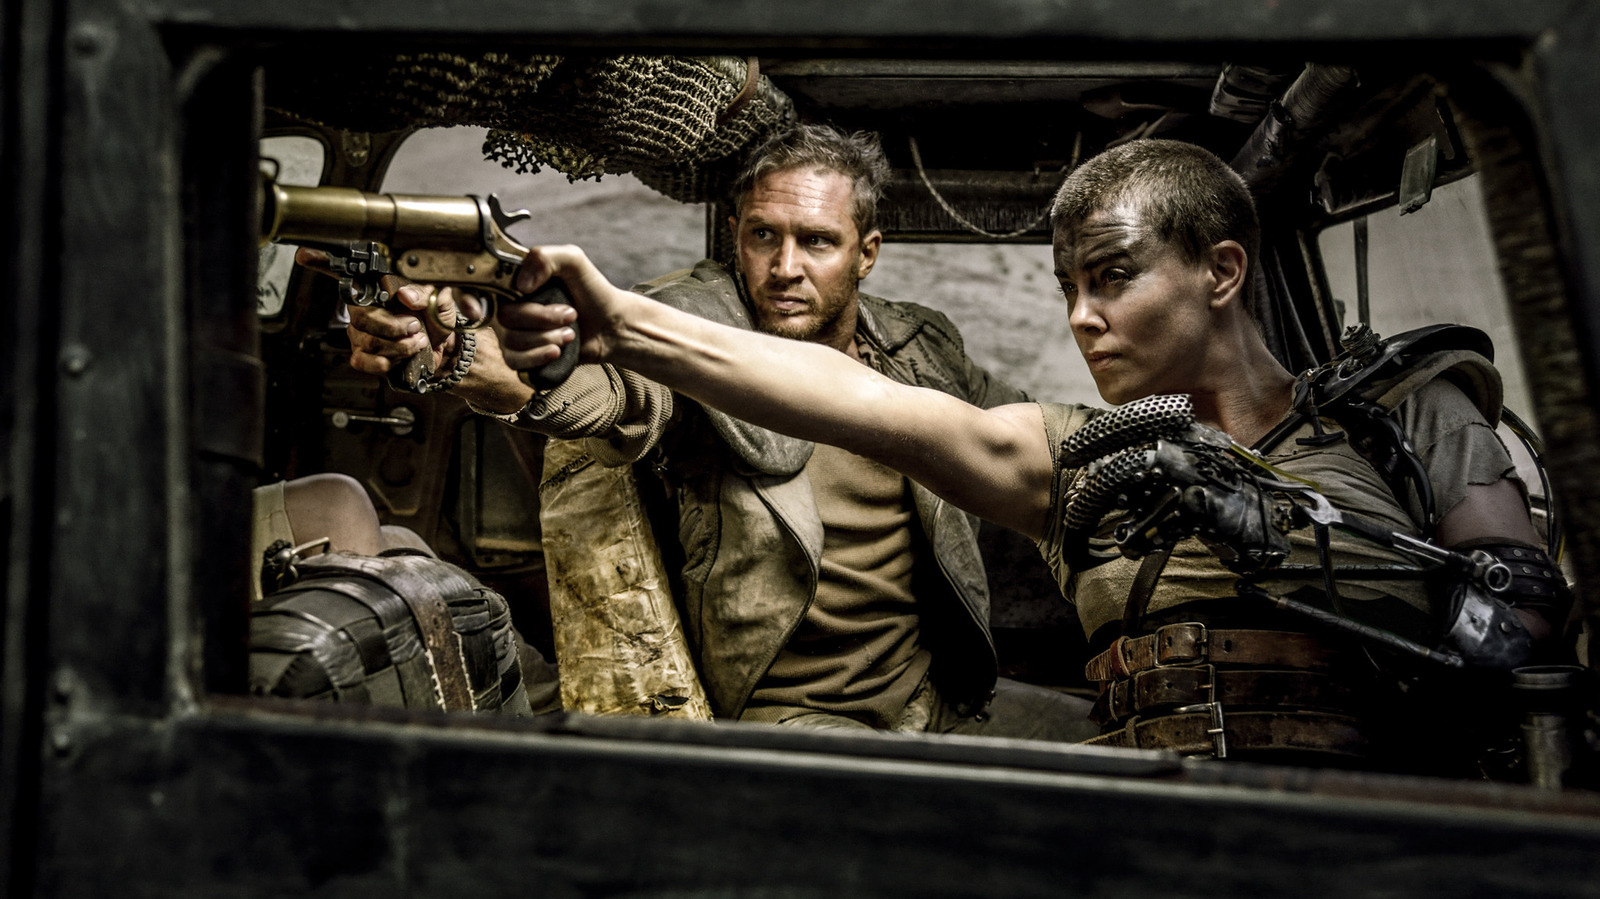 Anya Taylor-Joy Leads Mad Max Spin-Off, Furiosa into Prequel